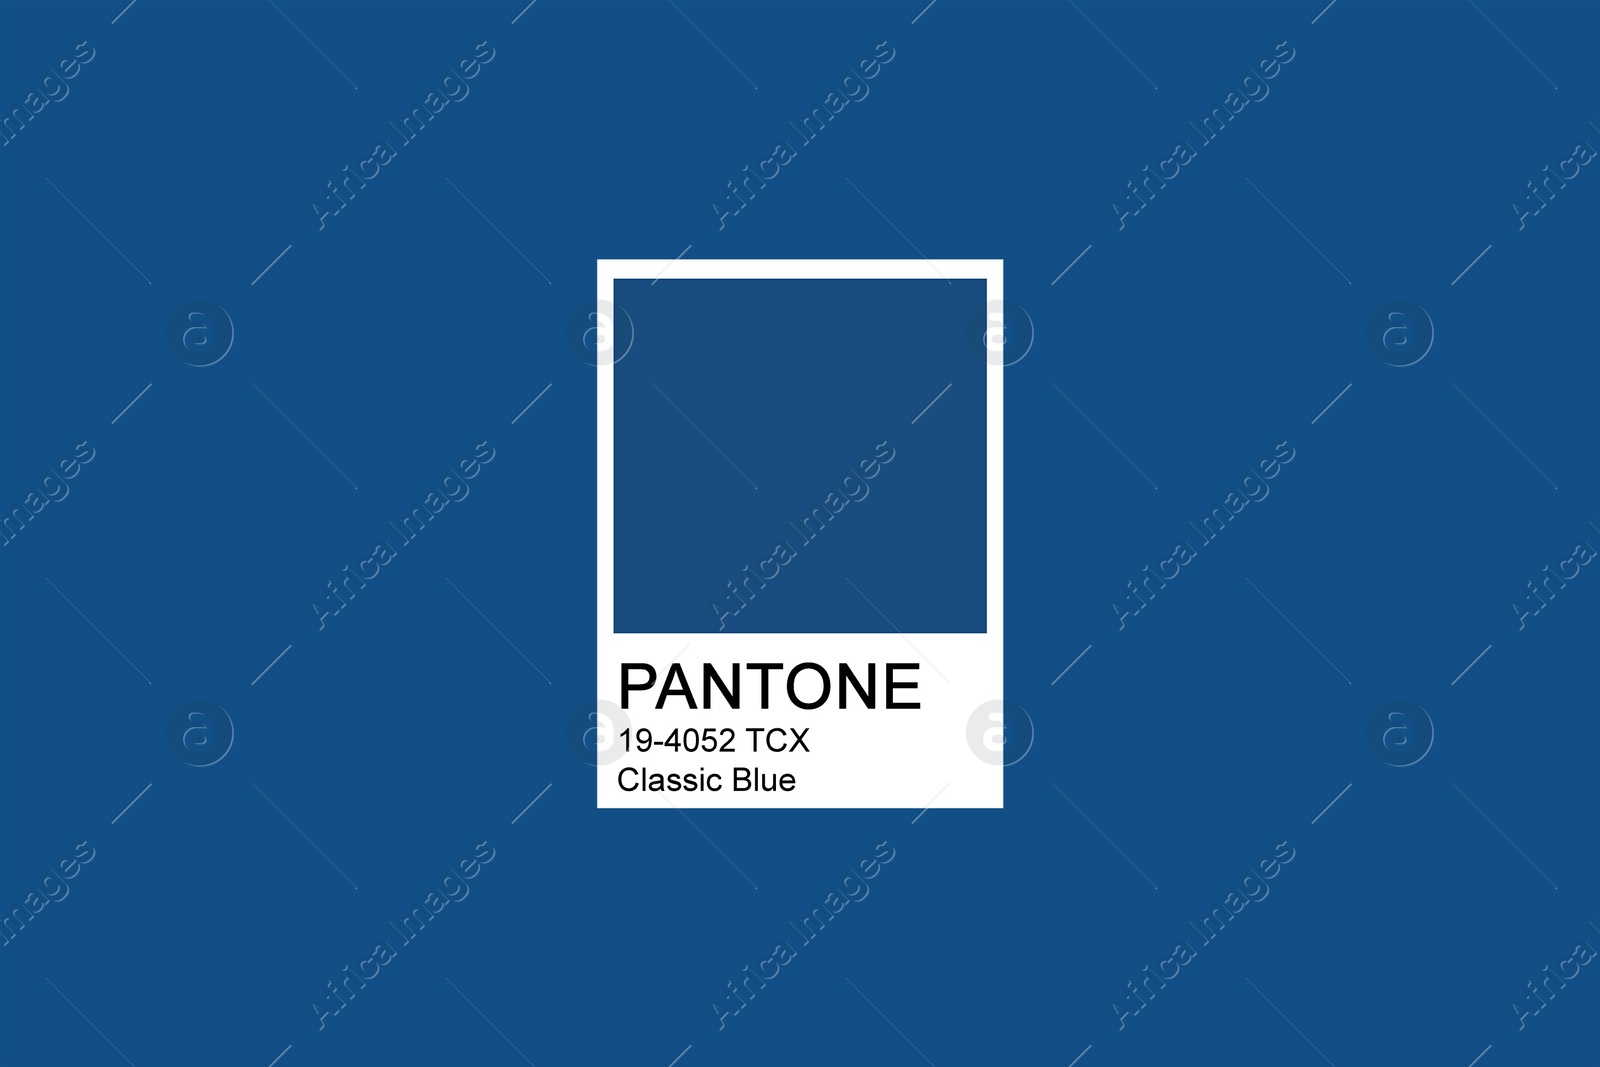 Image of Color of the year 2020 (Classic blue) as background